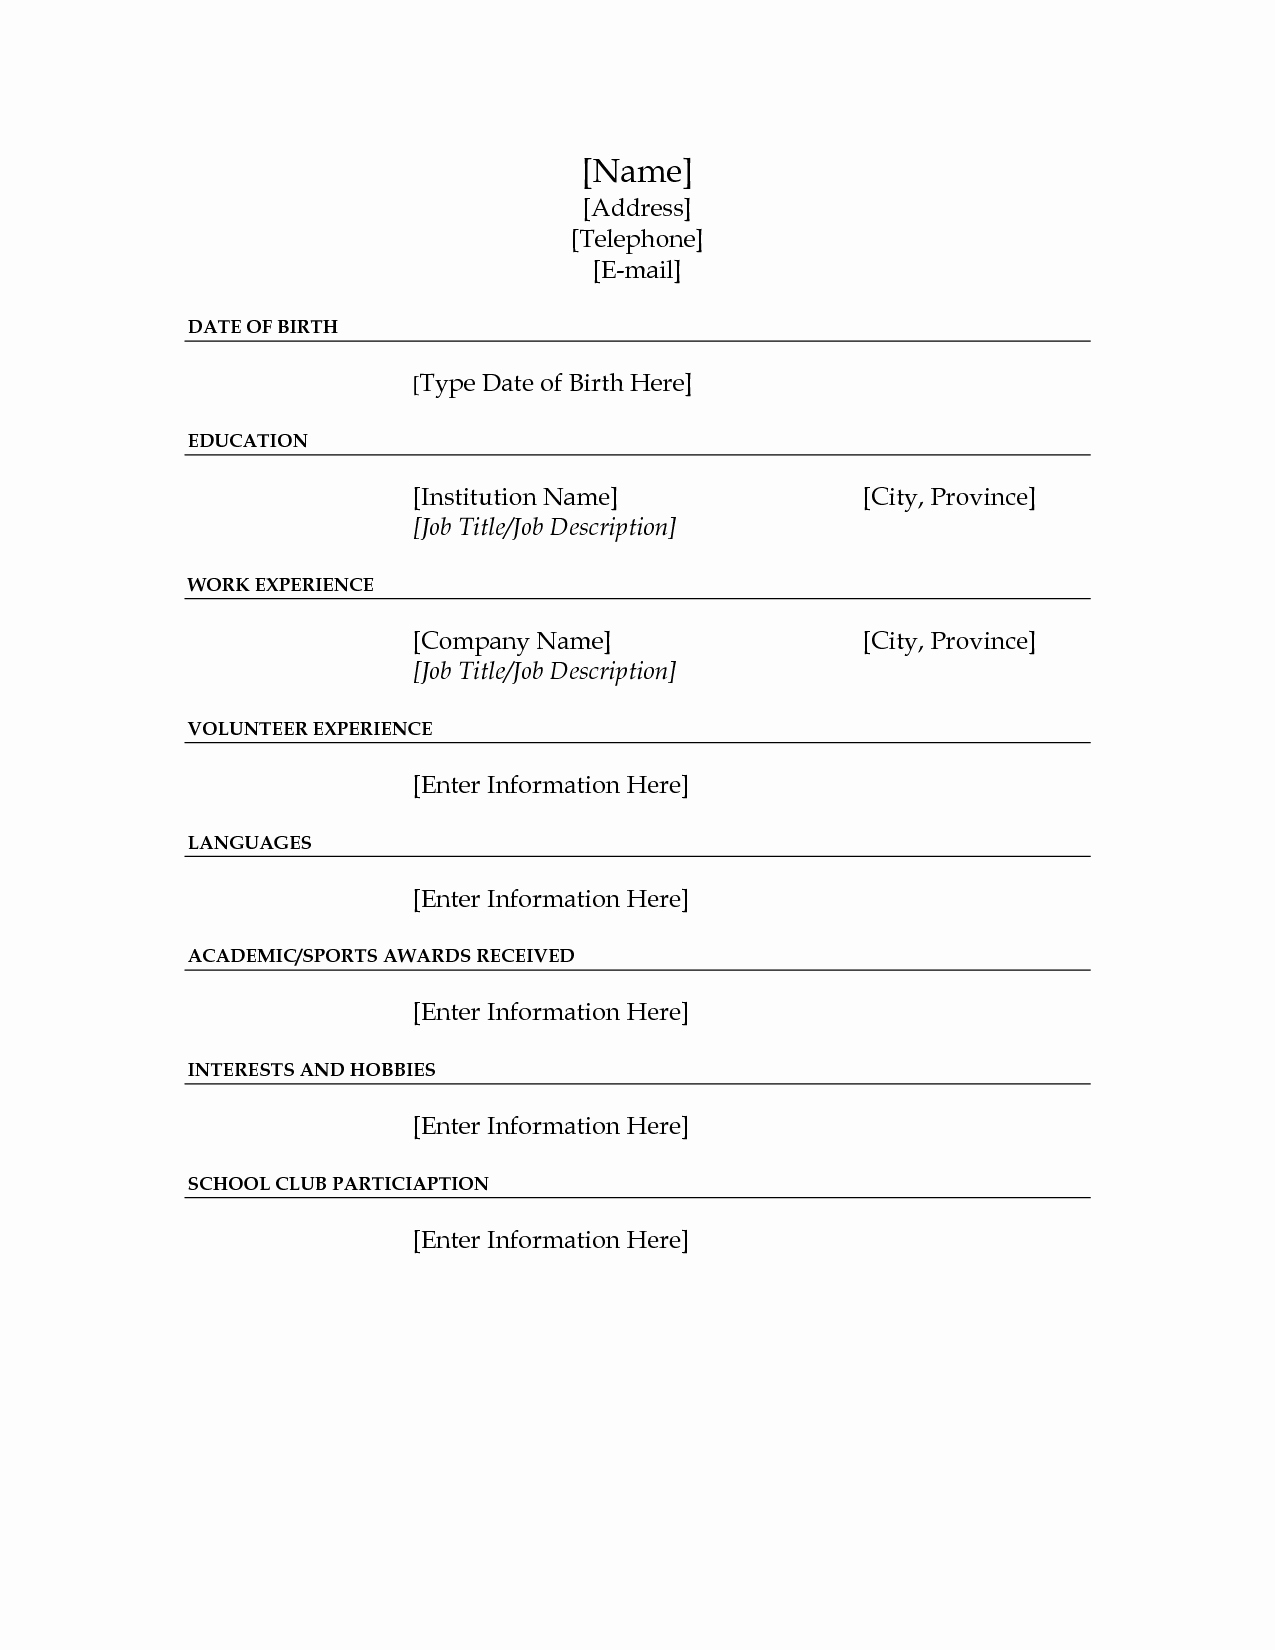 Resumes Fill In the Blanks Awesome Free Fill In the Blank Resume Umecareer